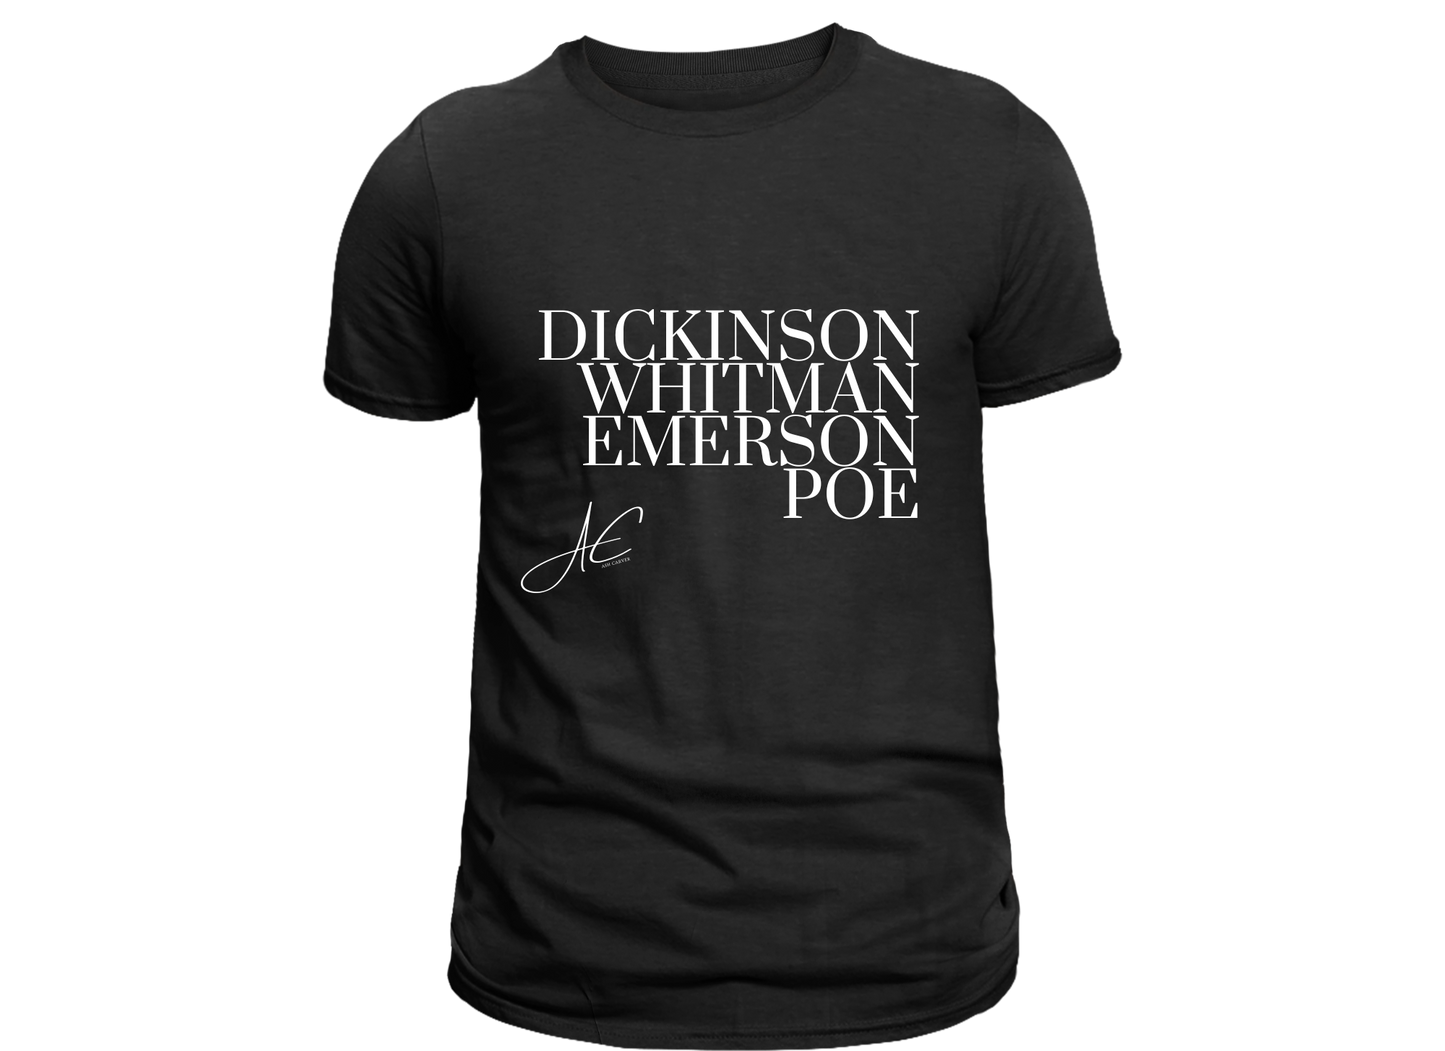 The Poetic Legends T-Shirt - Dickinson, Whitman, Emerson, Poe